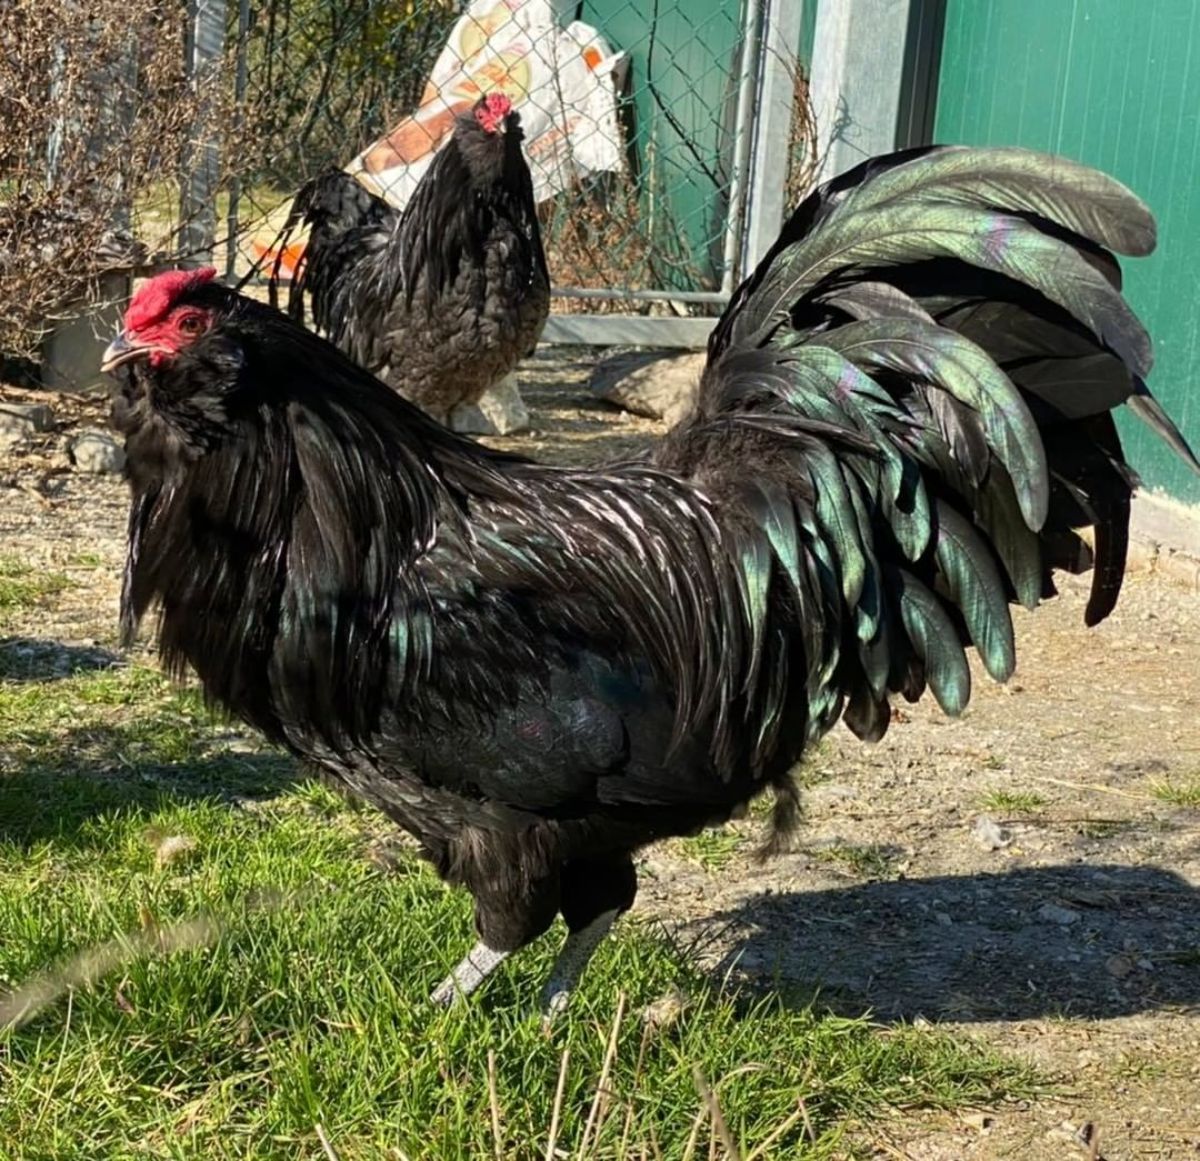 A beautiful black Appenzeller Barthuhner rooster in a backyard.